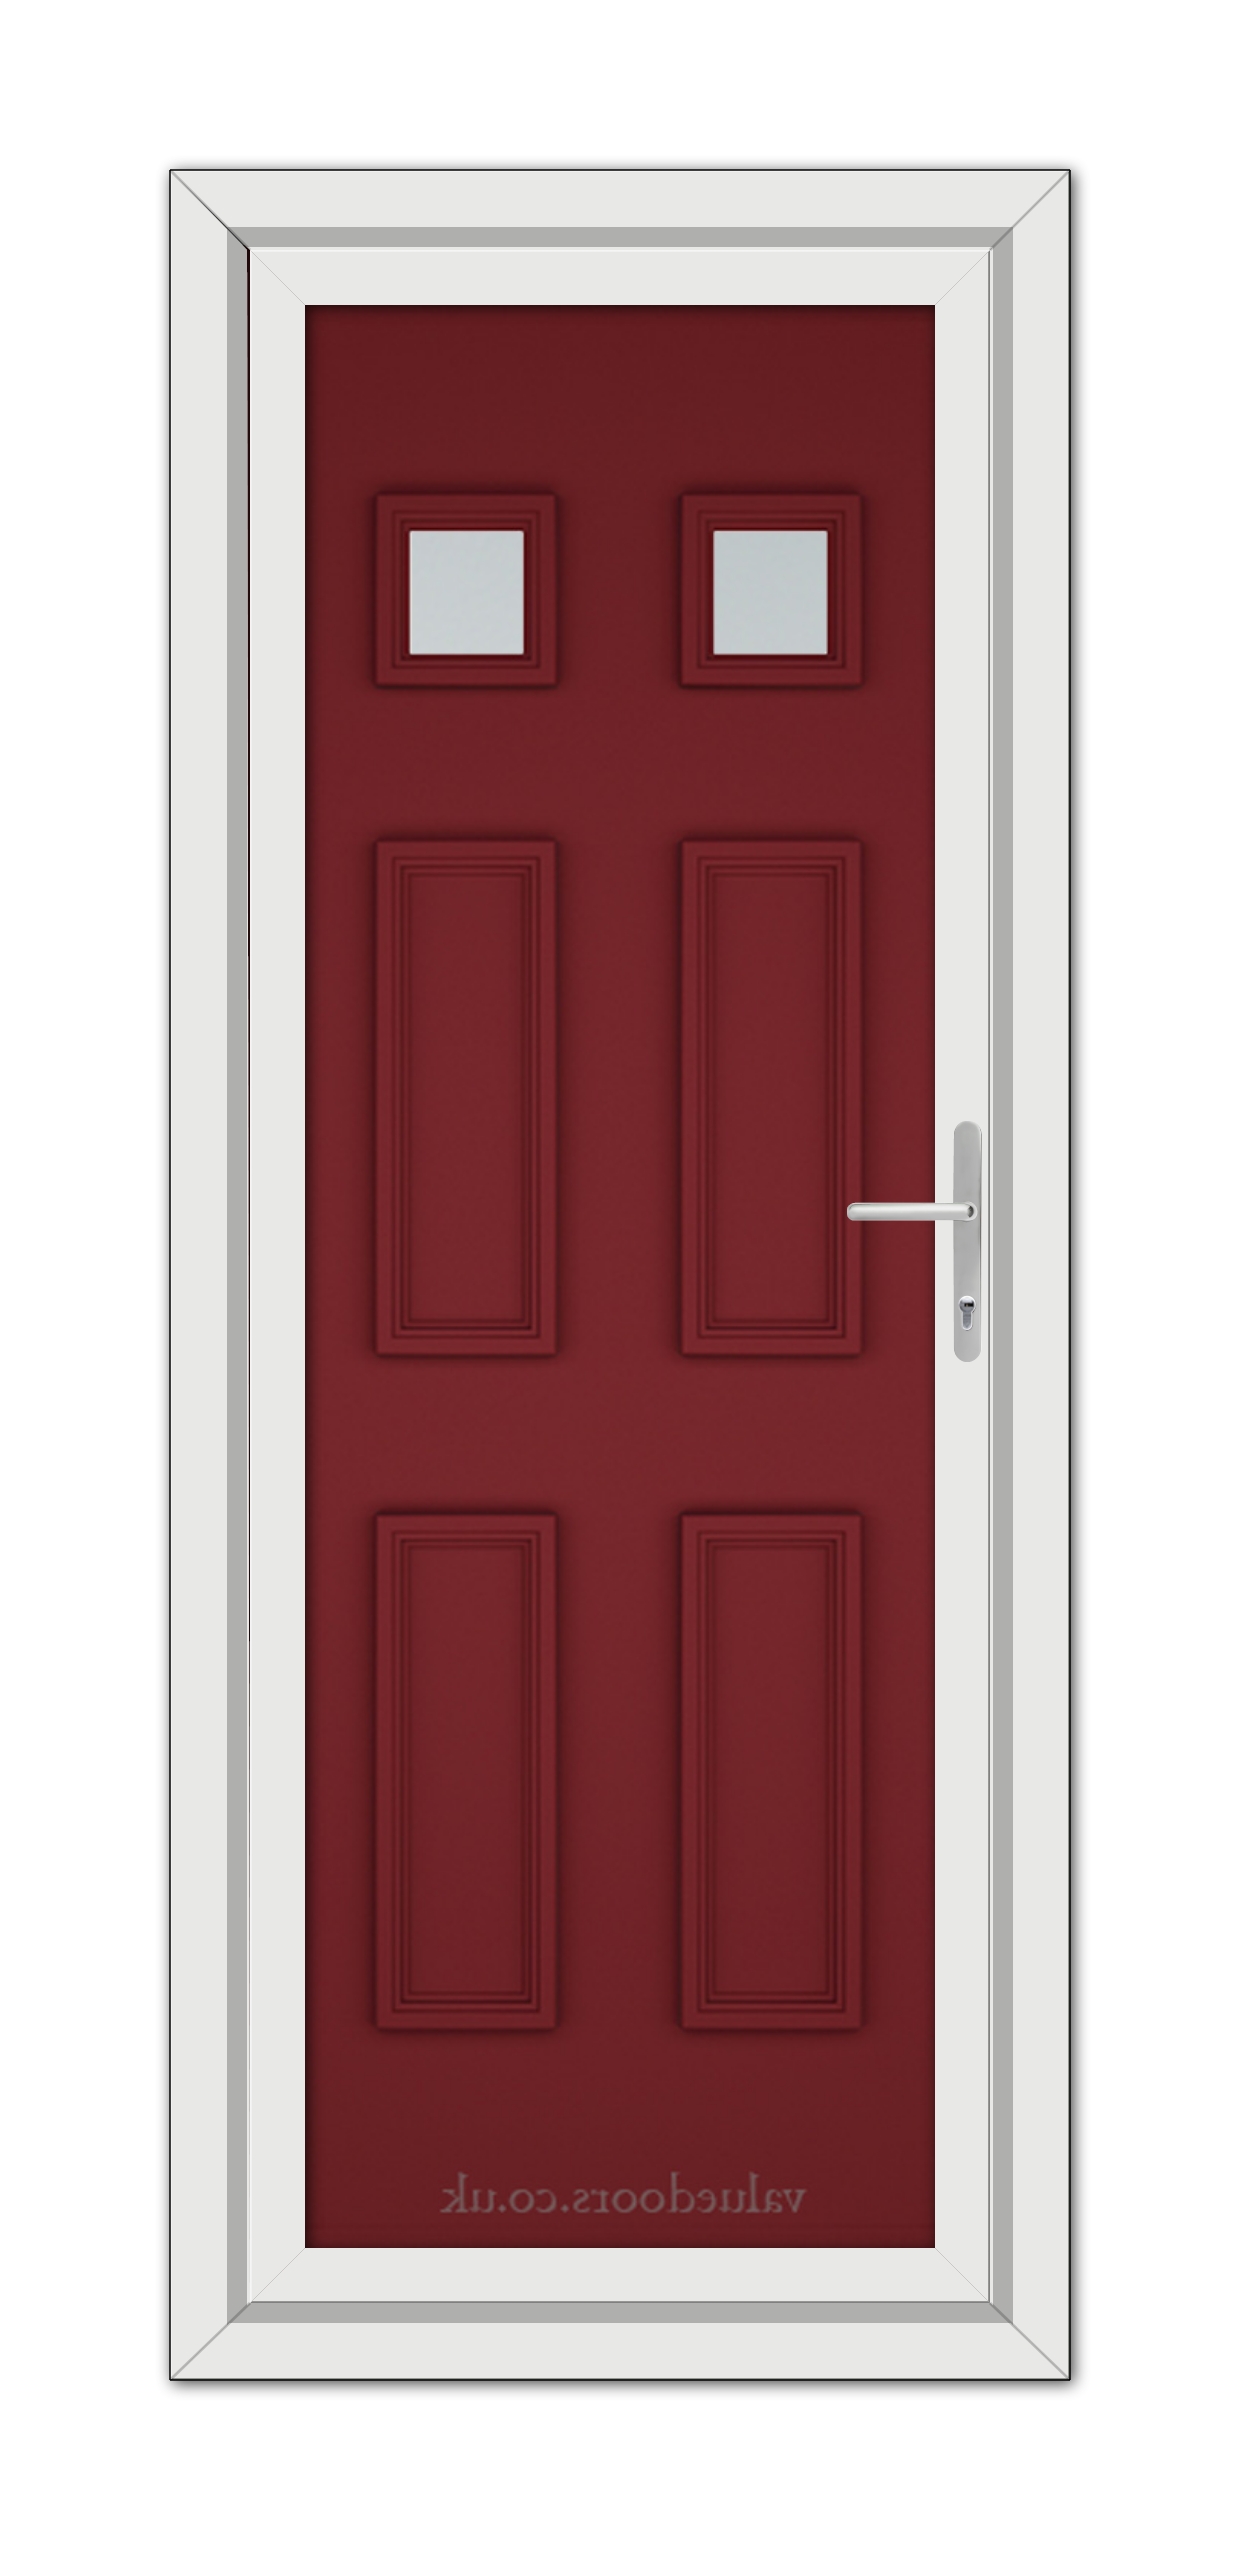 Red Windsor uPVC Door with two small square windows at the top and a silver handle, set within a white door frame.